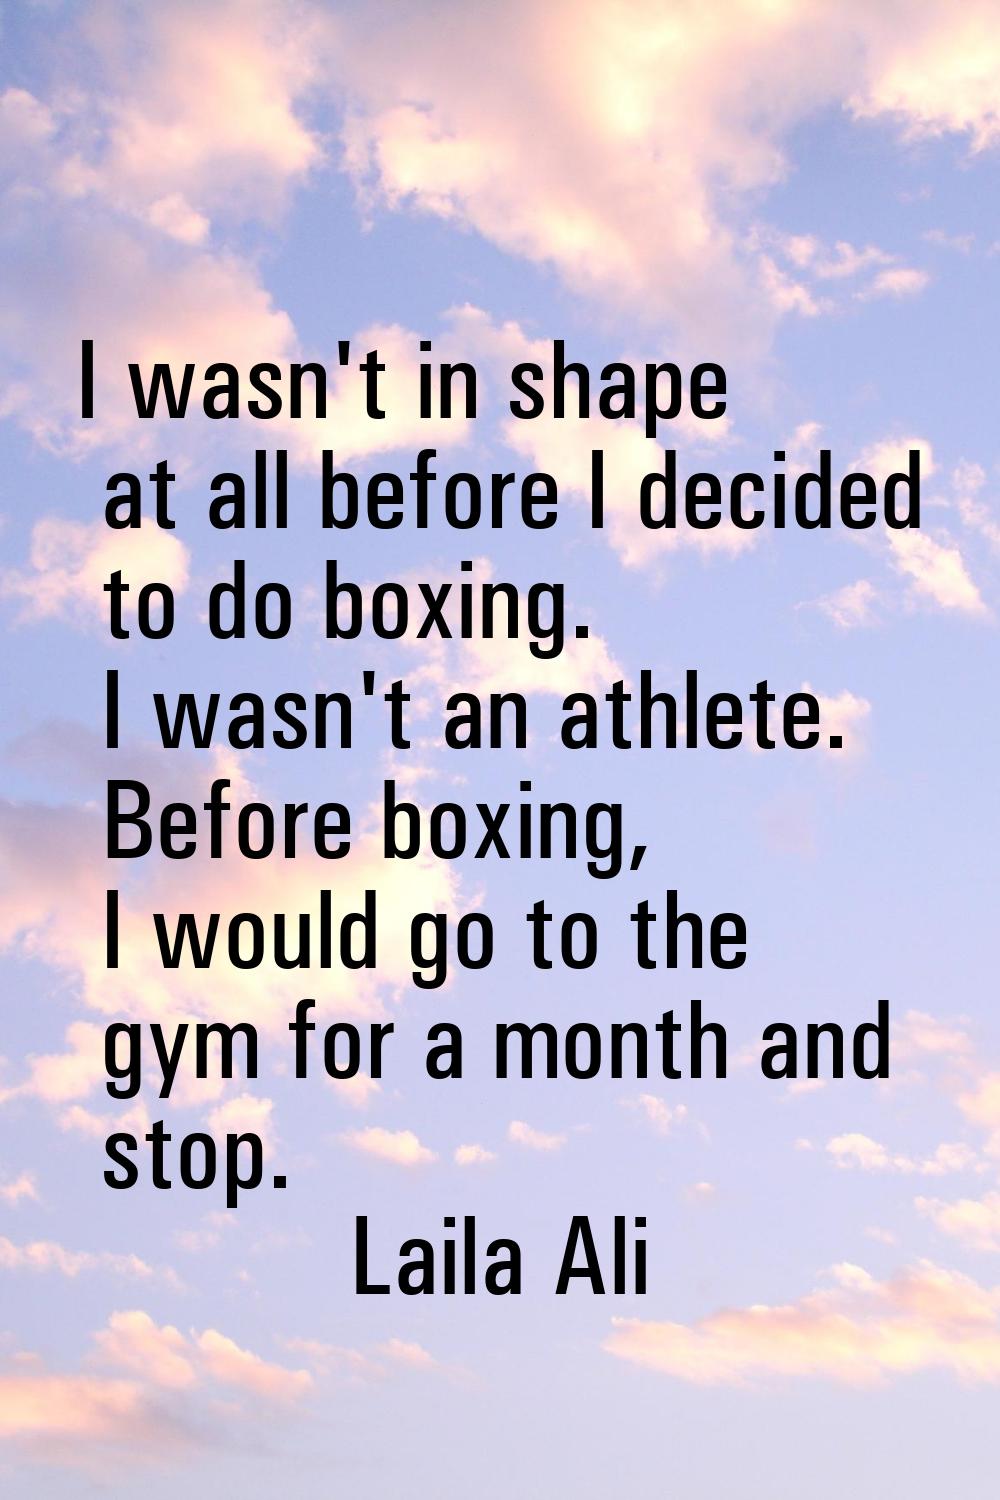 I wasn't in shape at all before I decided to do boxing. I wasn't an athlete. Before boxing, I would